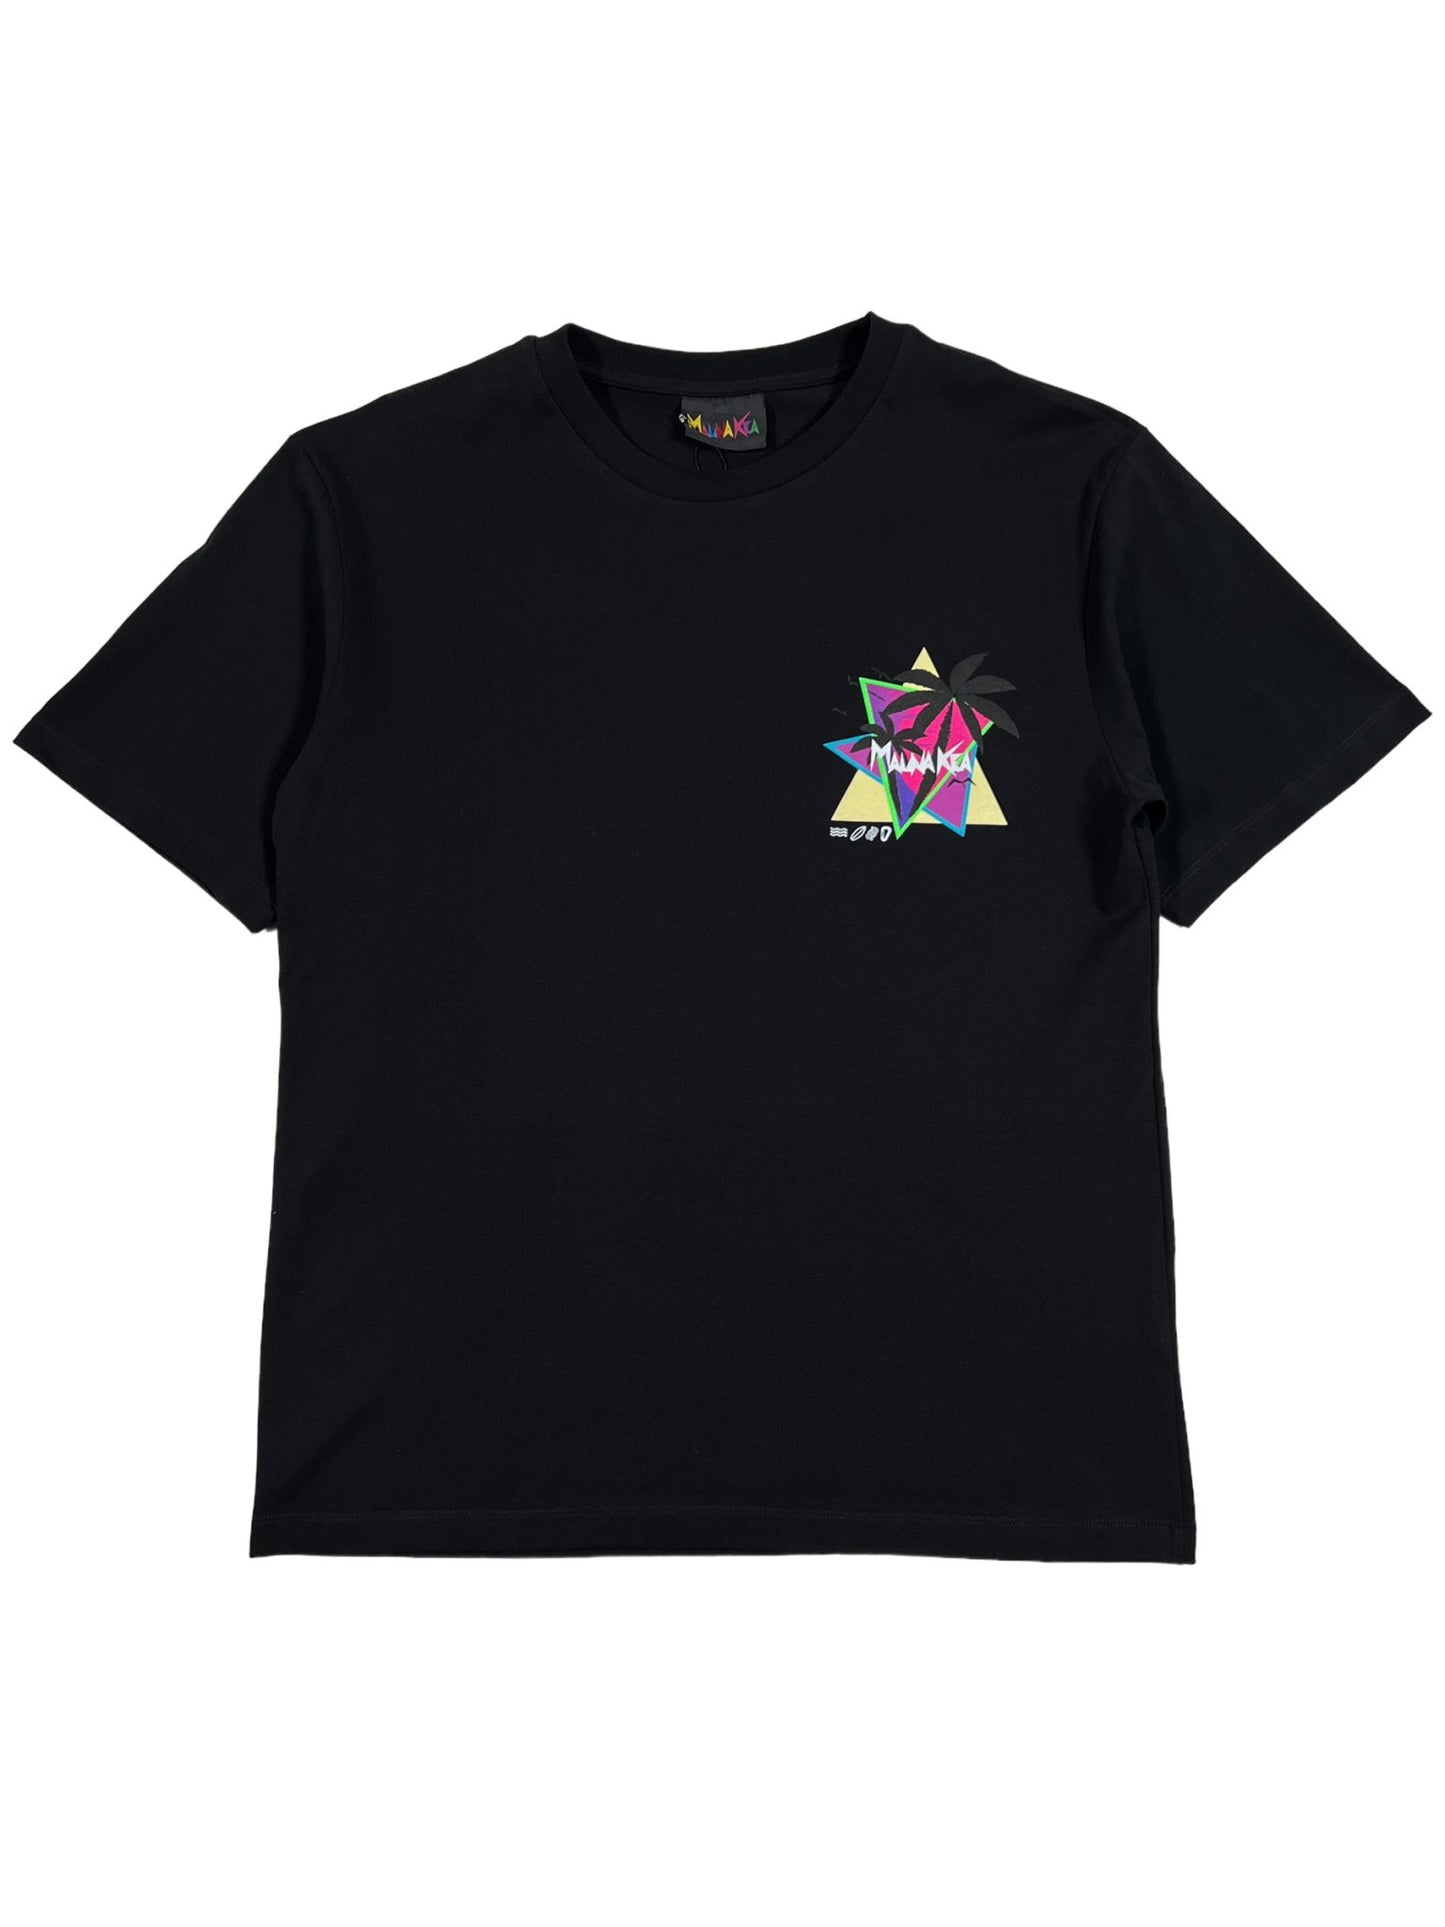 MAUNA-KEA MKU100-P999 SUNSET PALMS TEE BLK with a colorful geometric logo design featuring the text "NWAUKA" on the front left side, made from 100% cotton and proudly crafted in Italy.